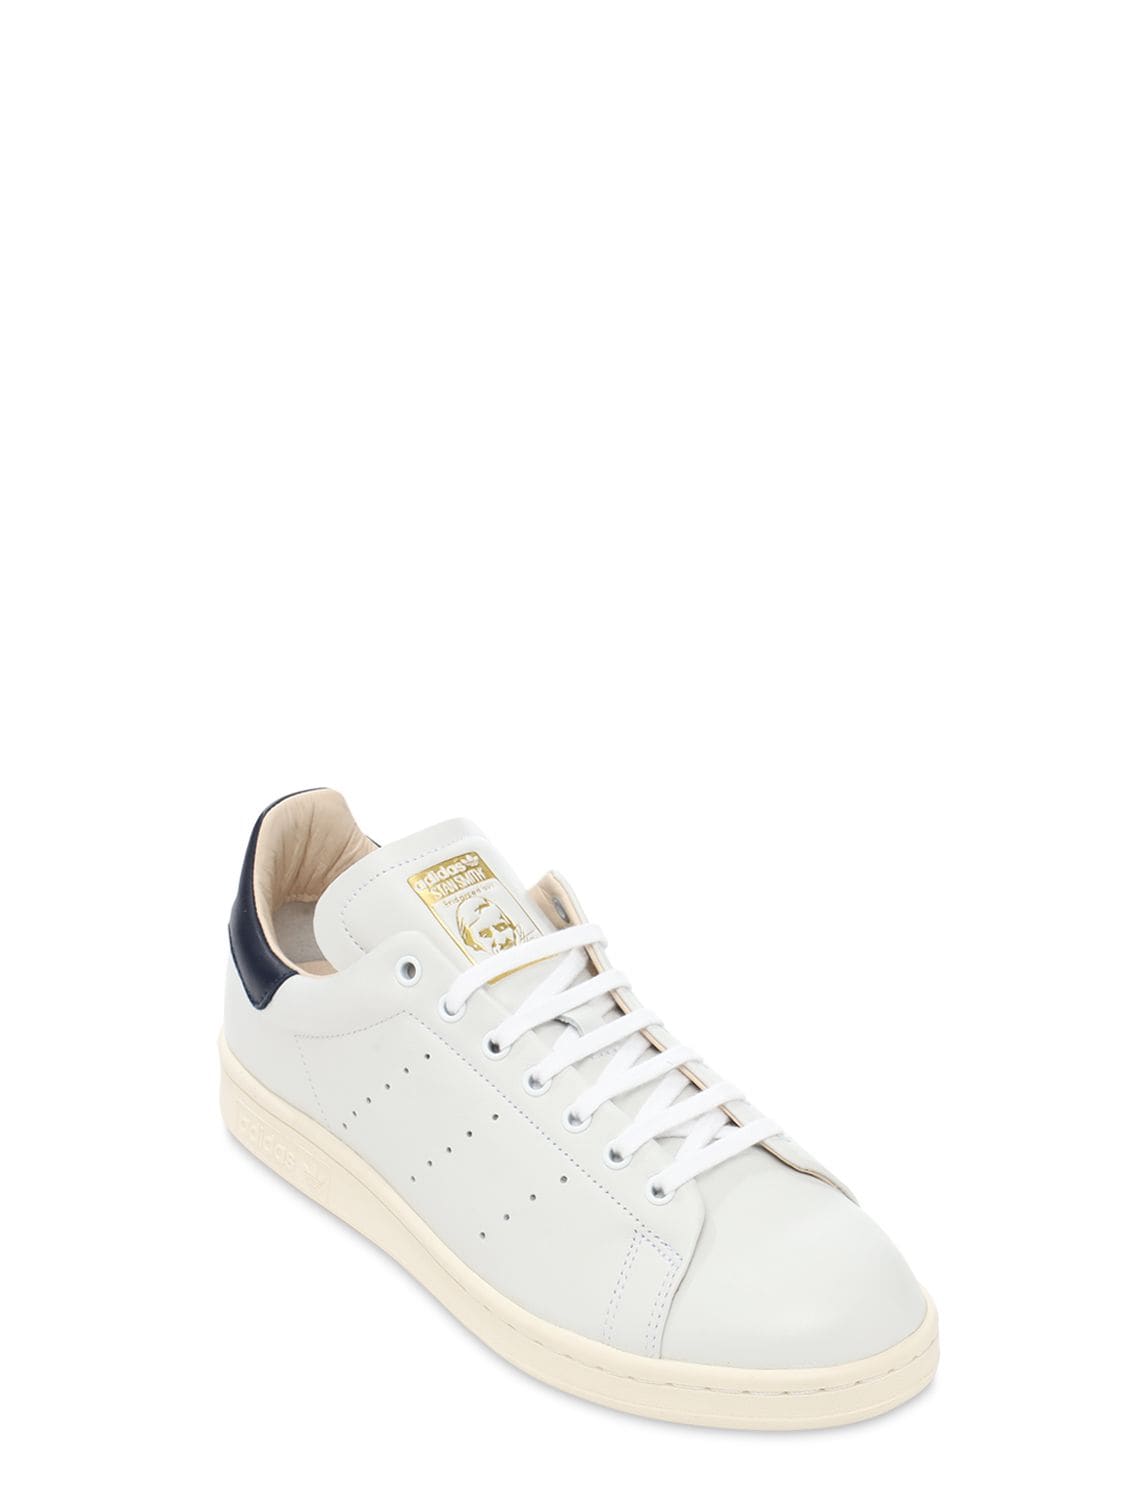 Adidas Originals Stan Smith Leather Sneakers In White | ModeSens